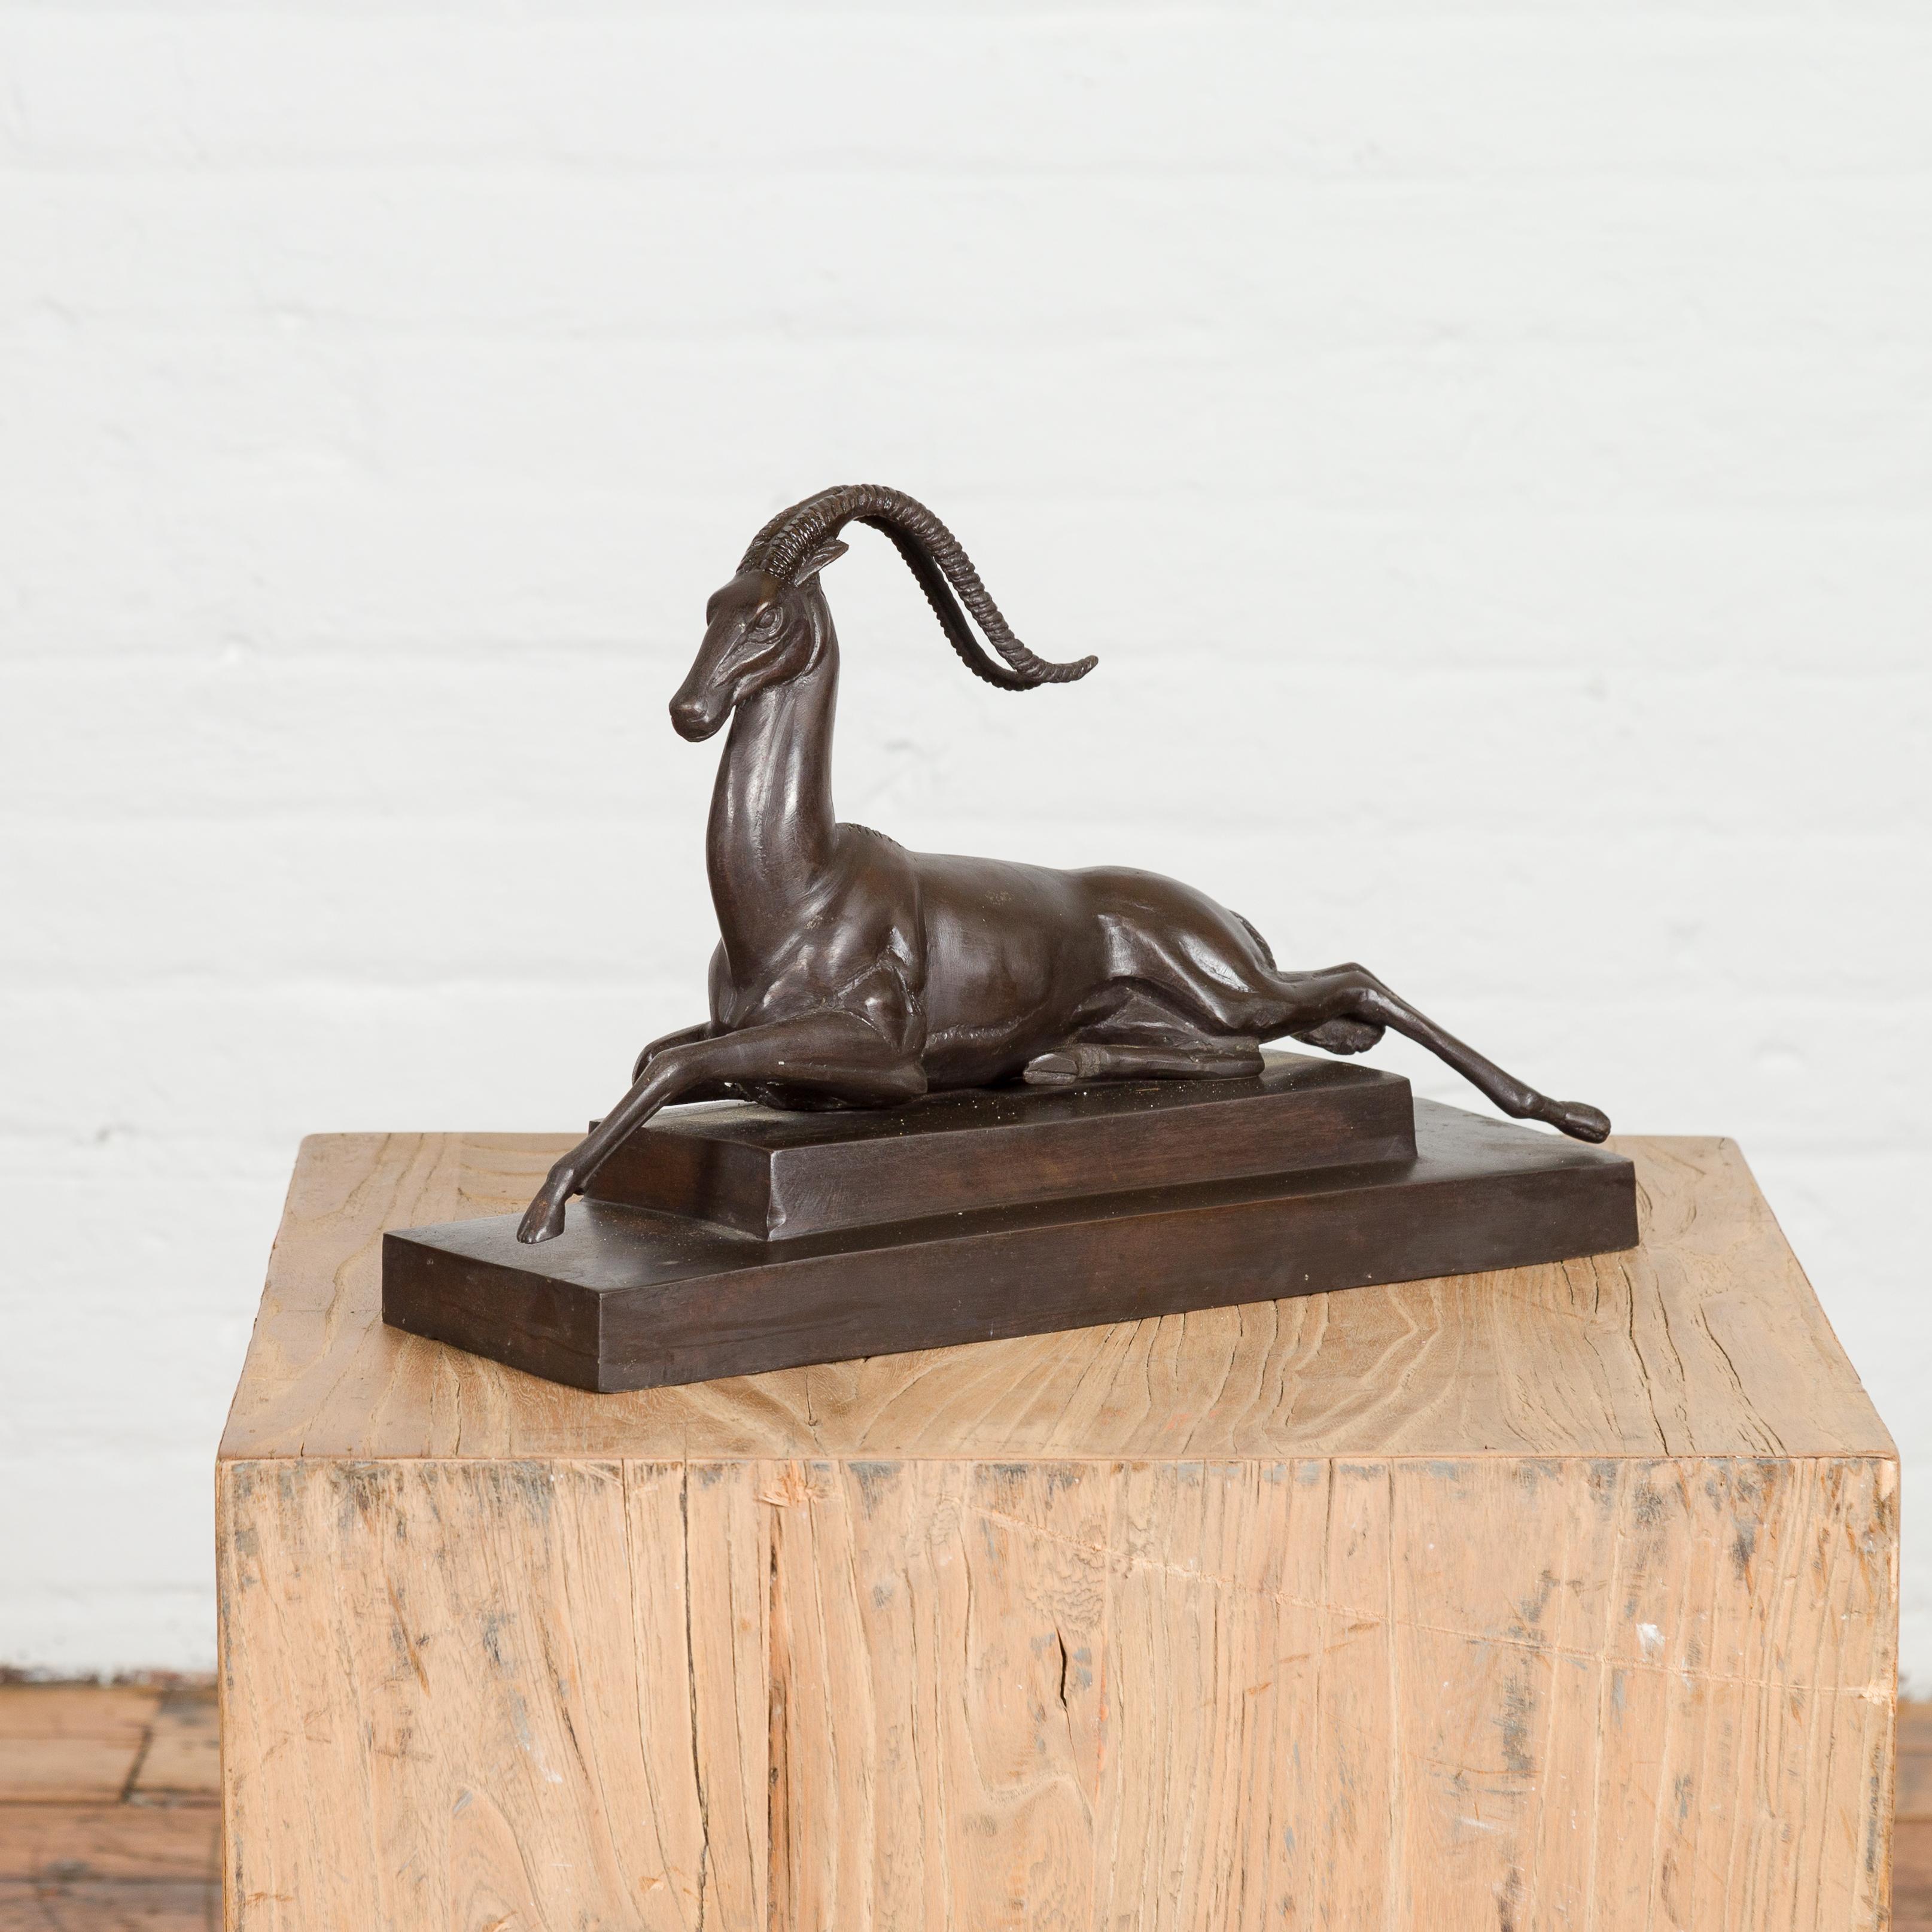 An Art Deco style bronze gazelle on stepped base after Pierre le Faguays in dark patina. Elevate your interior with this exquisite Art Deco-style bronze gazelle sculpture, reminiscent of the iconic works by the renowned artist Pierre le Faguays.